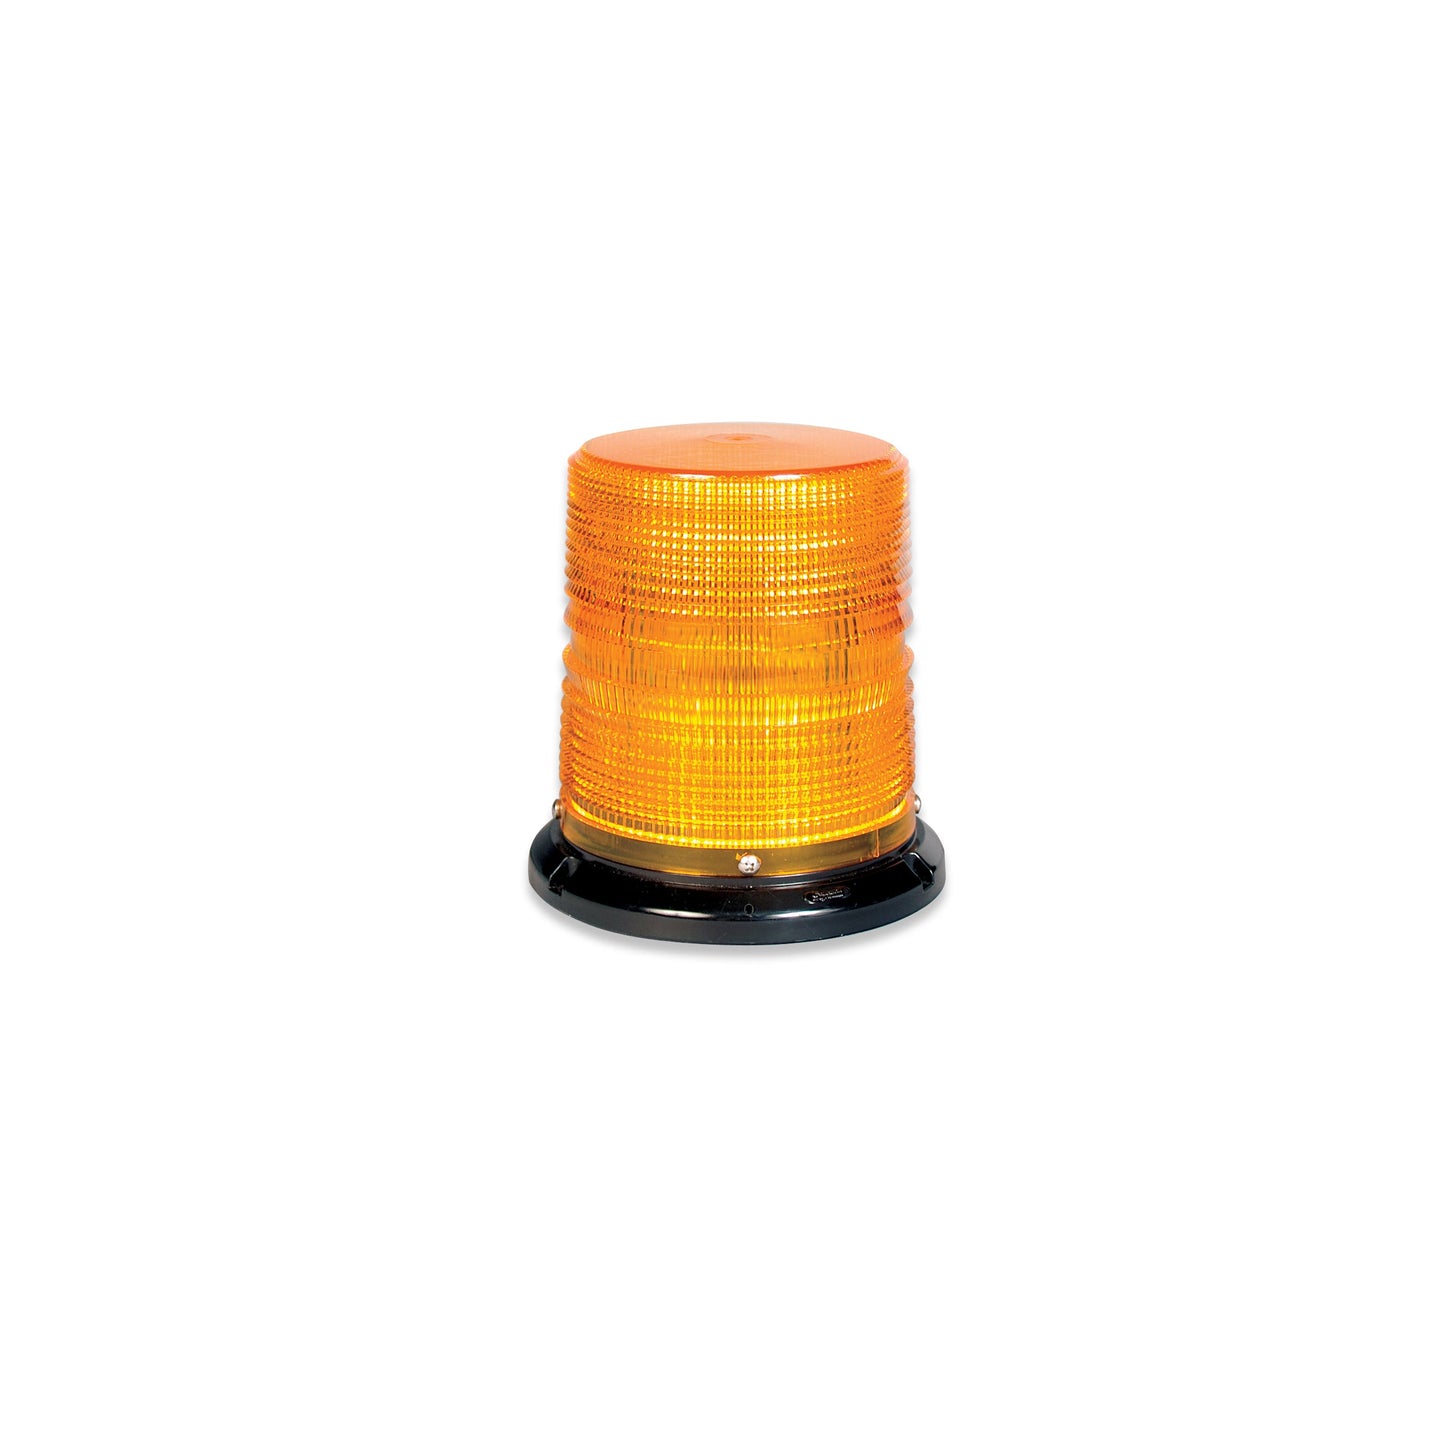 Soundoff Signal ELB45BML+WC 4500 Series Led Beacon, 10-30V, Sae J845 Class 1 - Magnetic Mount, 4" Clear Dome/ White Leds